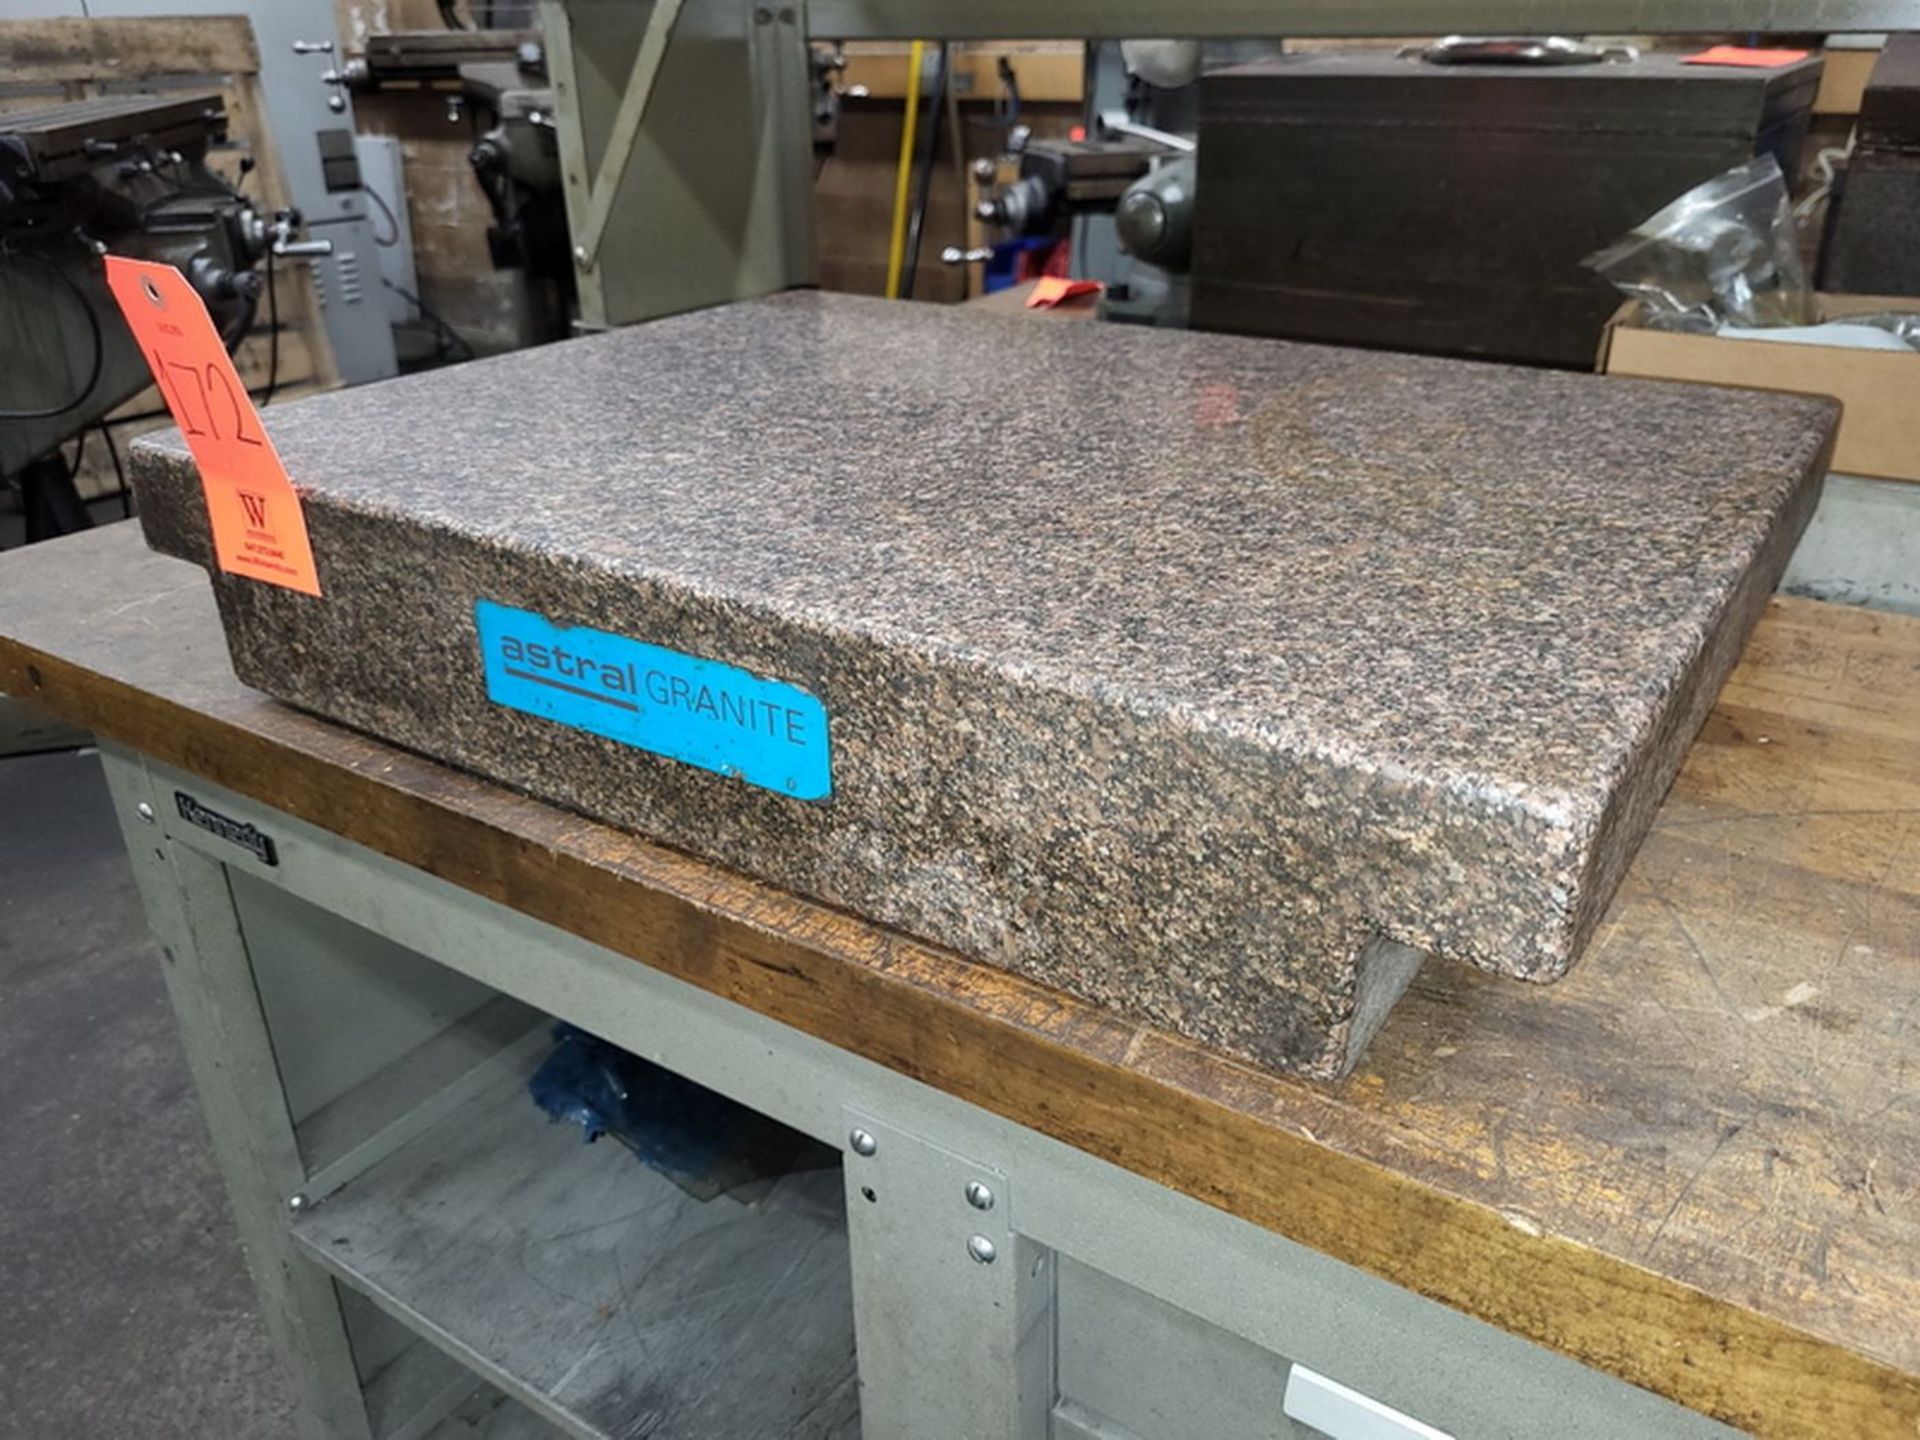 Granite Surface Plate, 18" x 24" x 4.5" high - Image 2 of 2